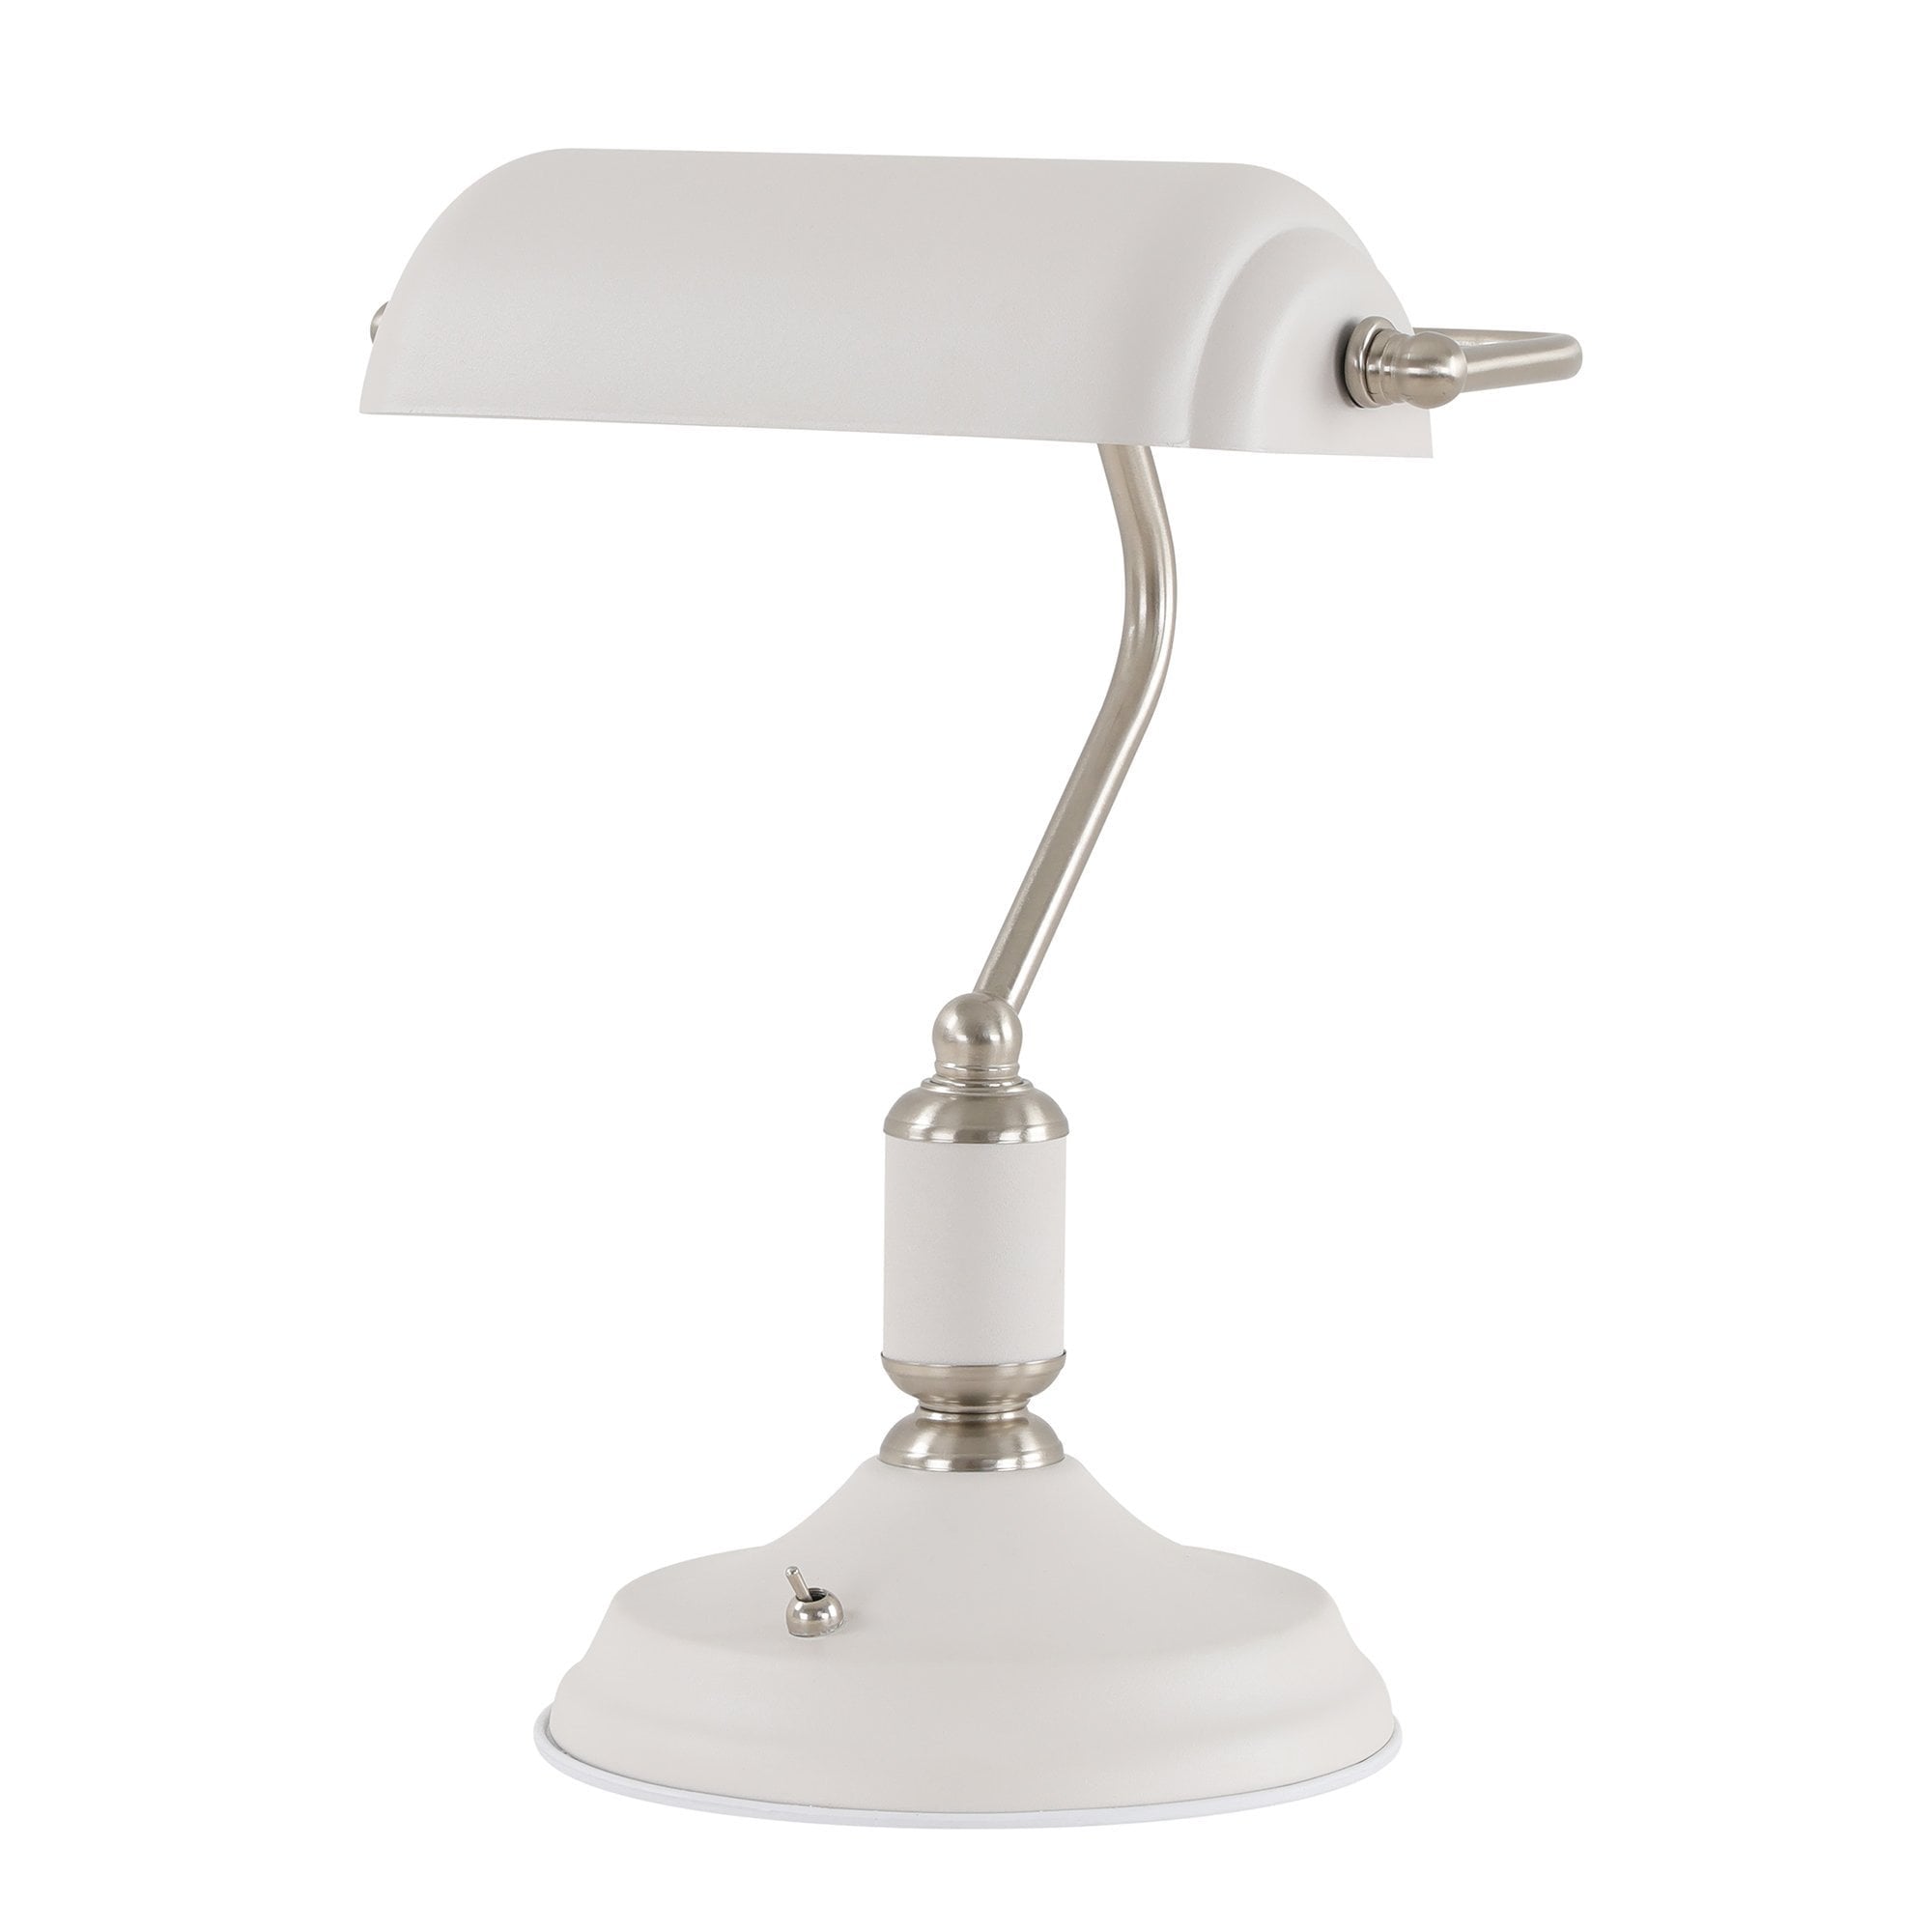 Table Lamp 1 Light With Toggle Switch, Satin Nickel/Sand White